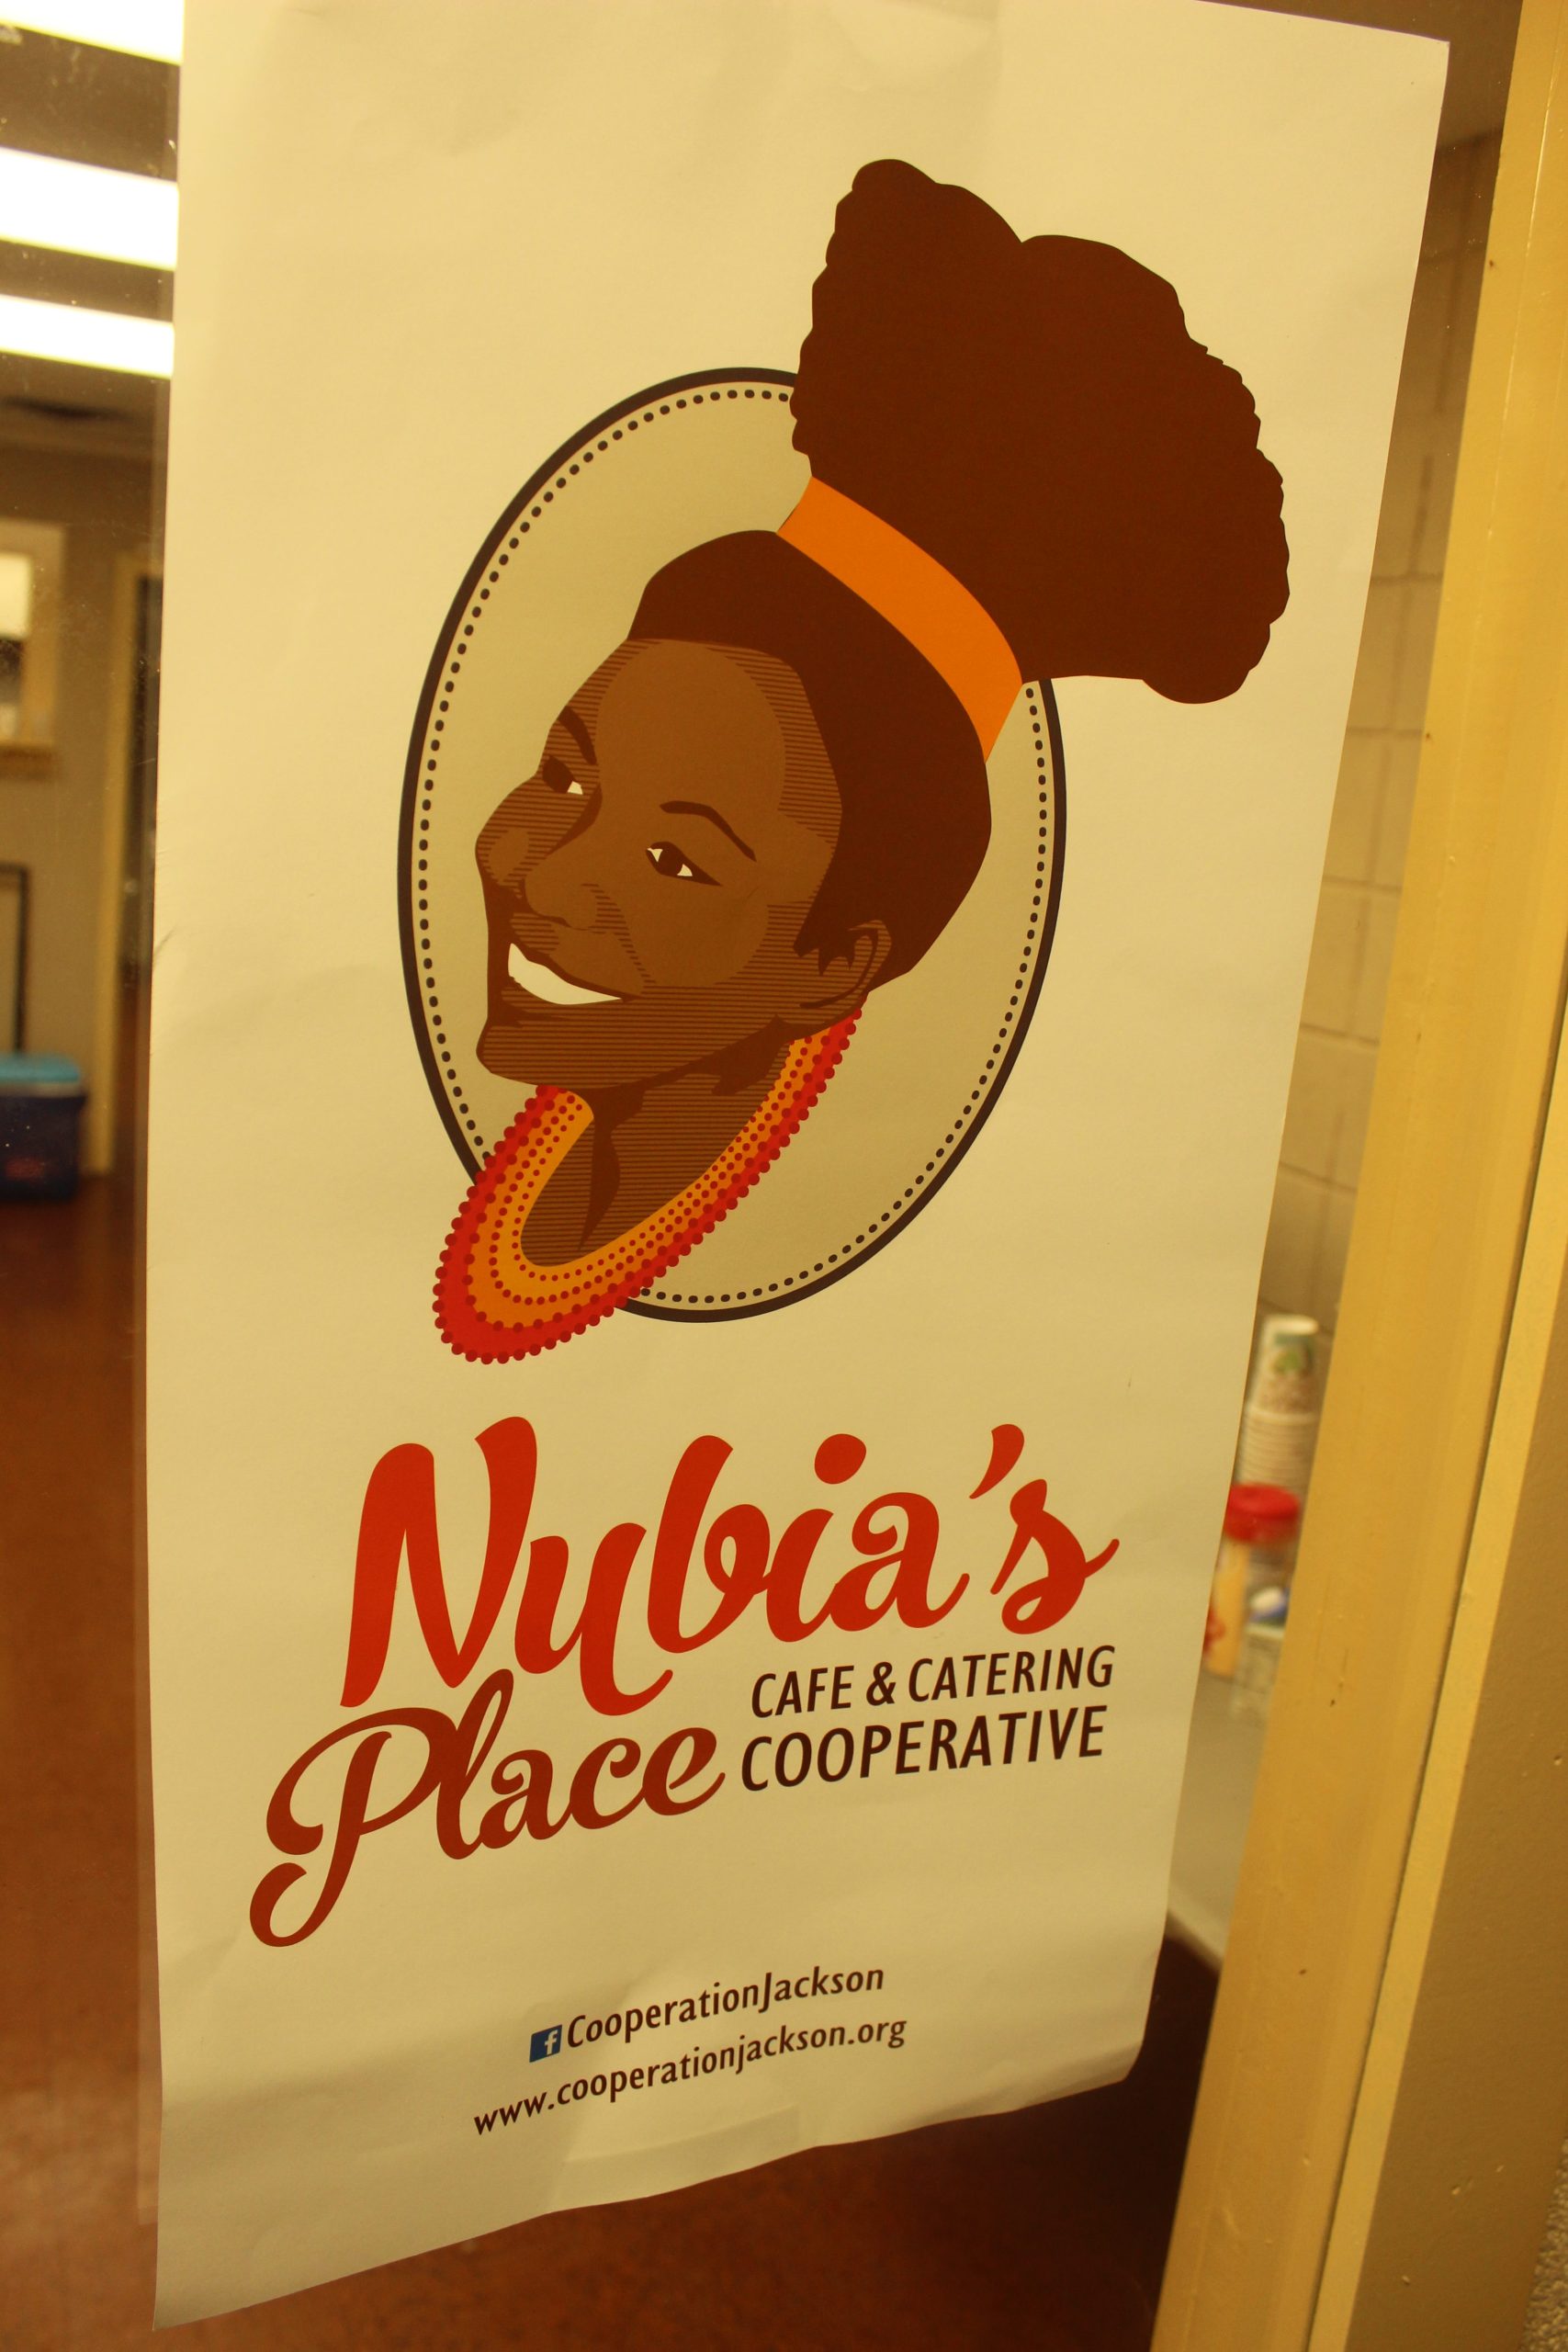 Nubia’s Place Café and Catering Cooperative Logo.